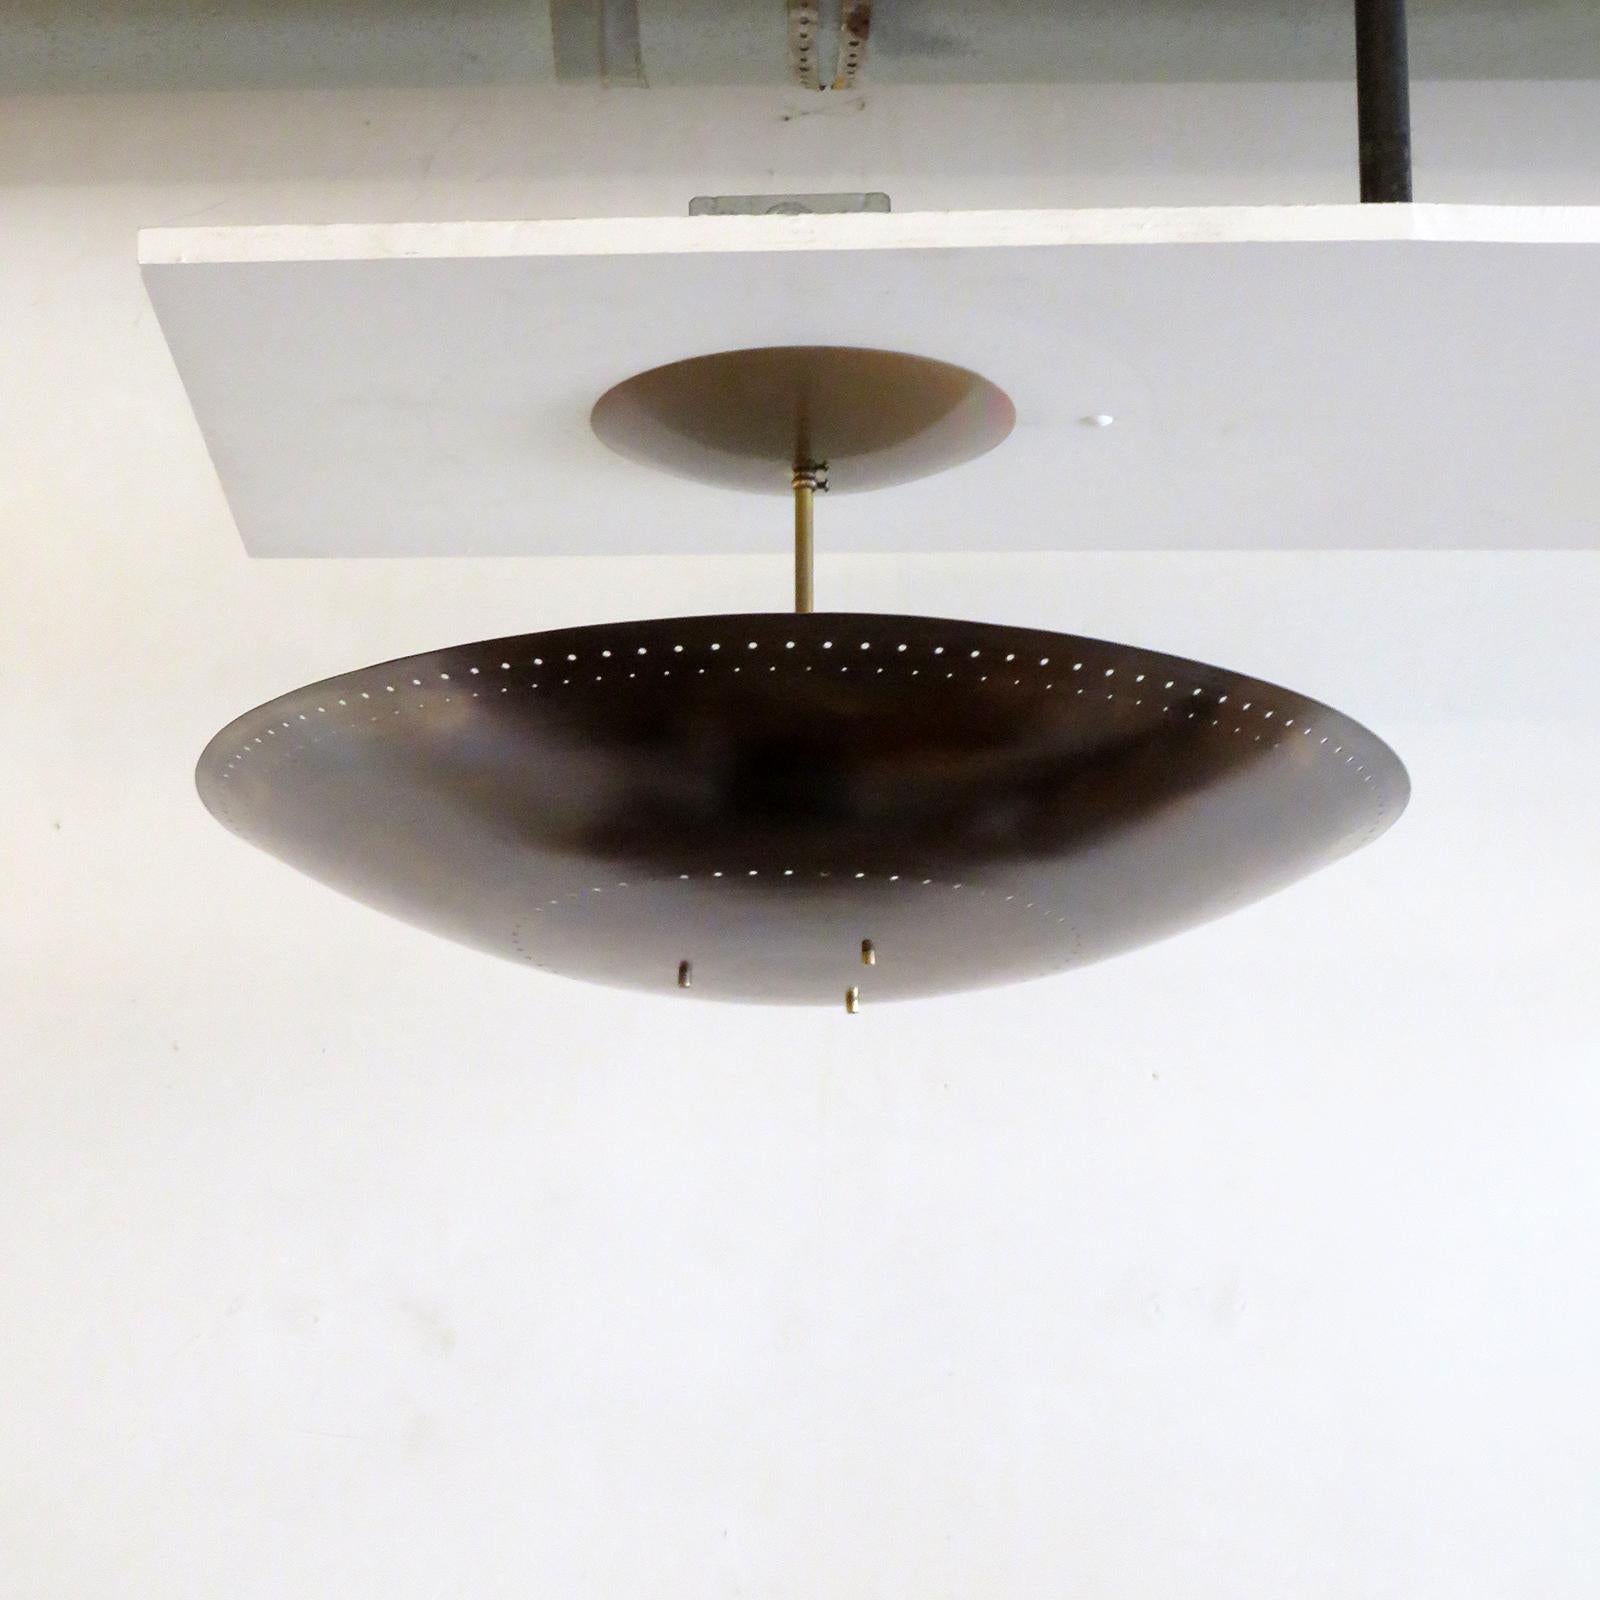 Large-scale ceiling flushmount light Utah-24 designed by Gallery L7, handcrafted and finished in Los Angeles from American brass, suspended perforated raw, aged brass disc (24inch diameter). Six E12 sockets per fixture, max. wattage 40w each, wired